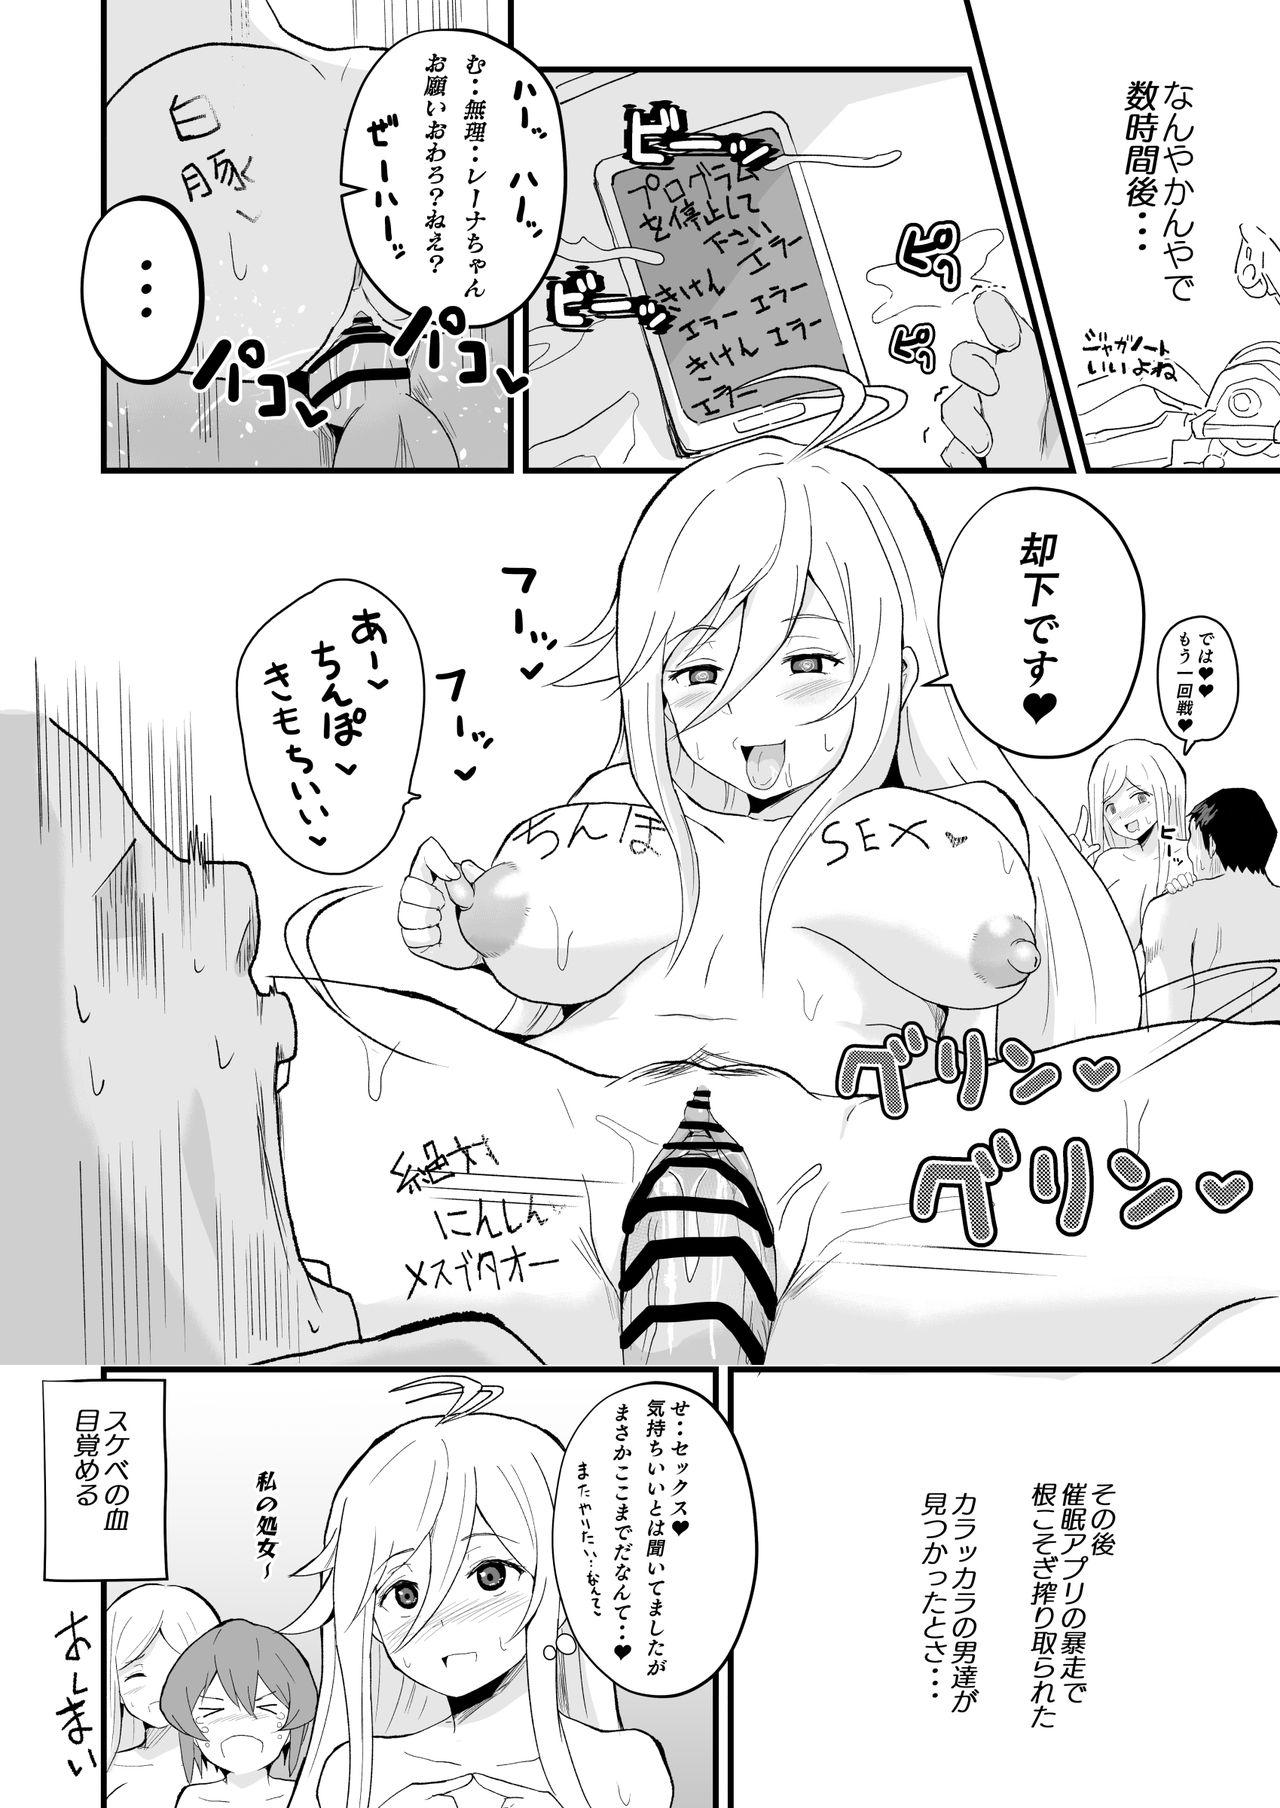 Double 短編エロ漫画-86編 Blows - Page 4